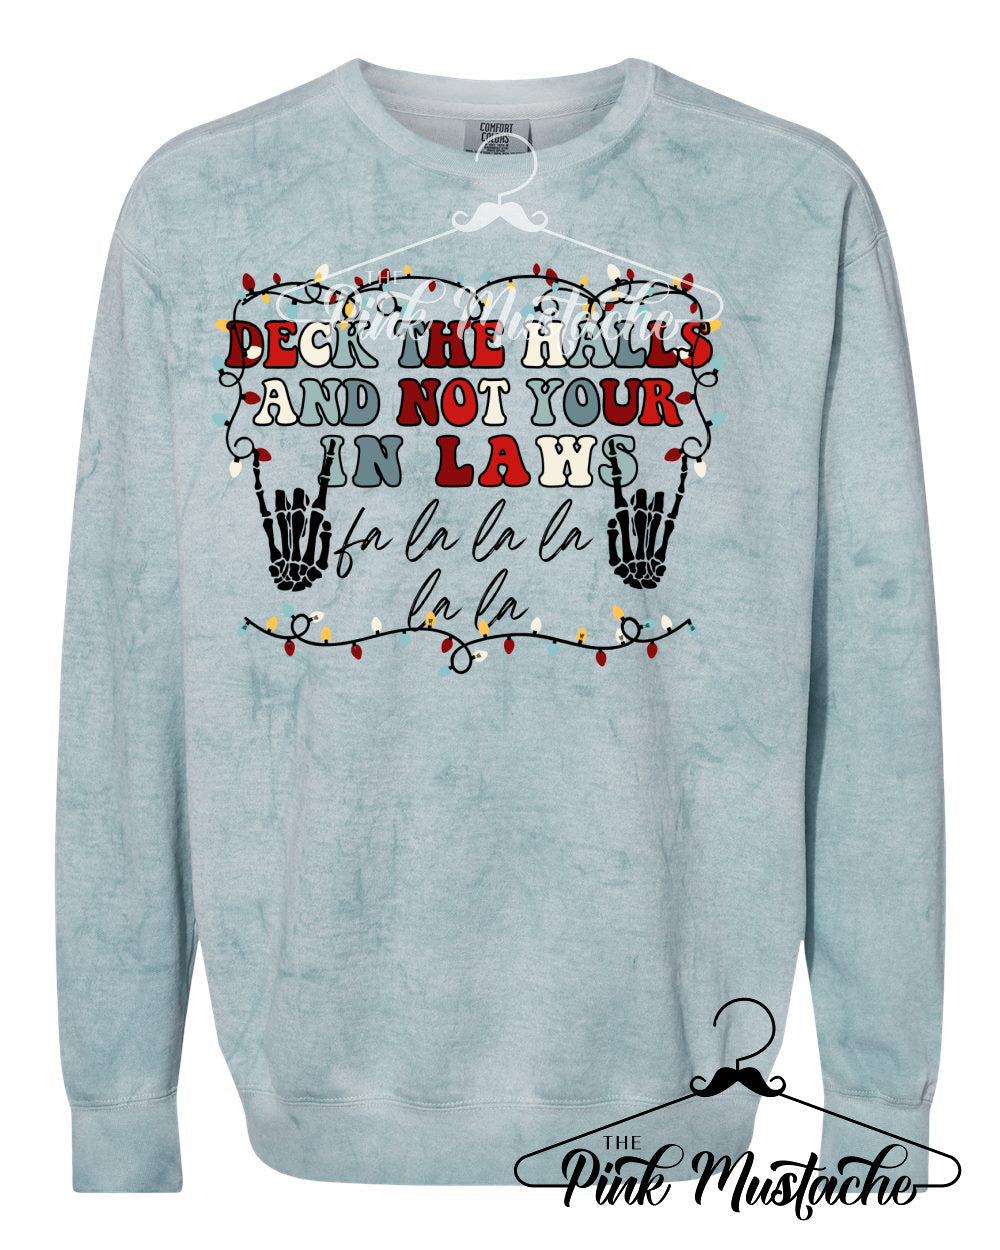 Comfort Colors Colorblast Deck The Halls and Not Your In Laws Sweatshirt - Sizes and Inventory Limited